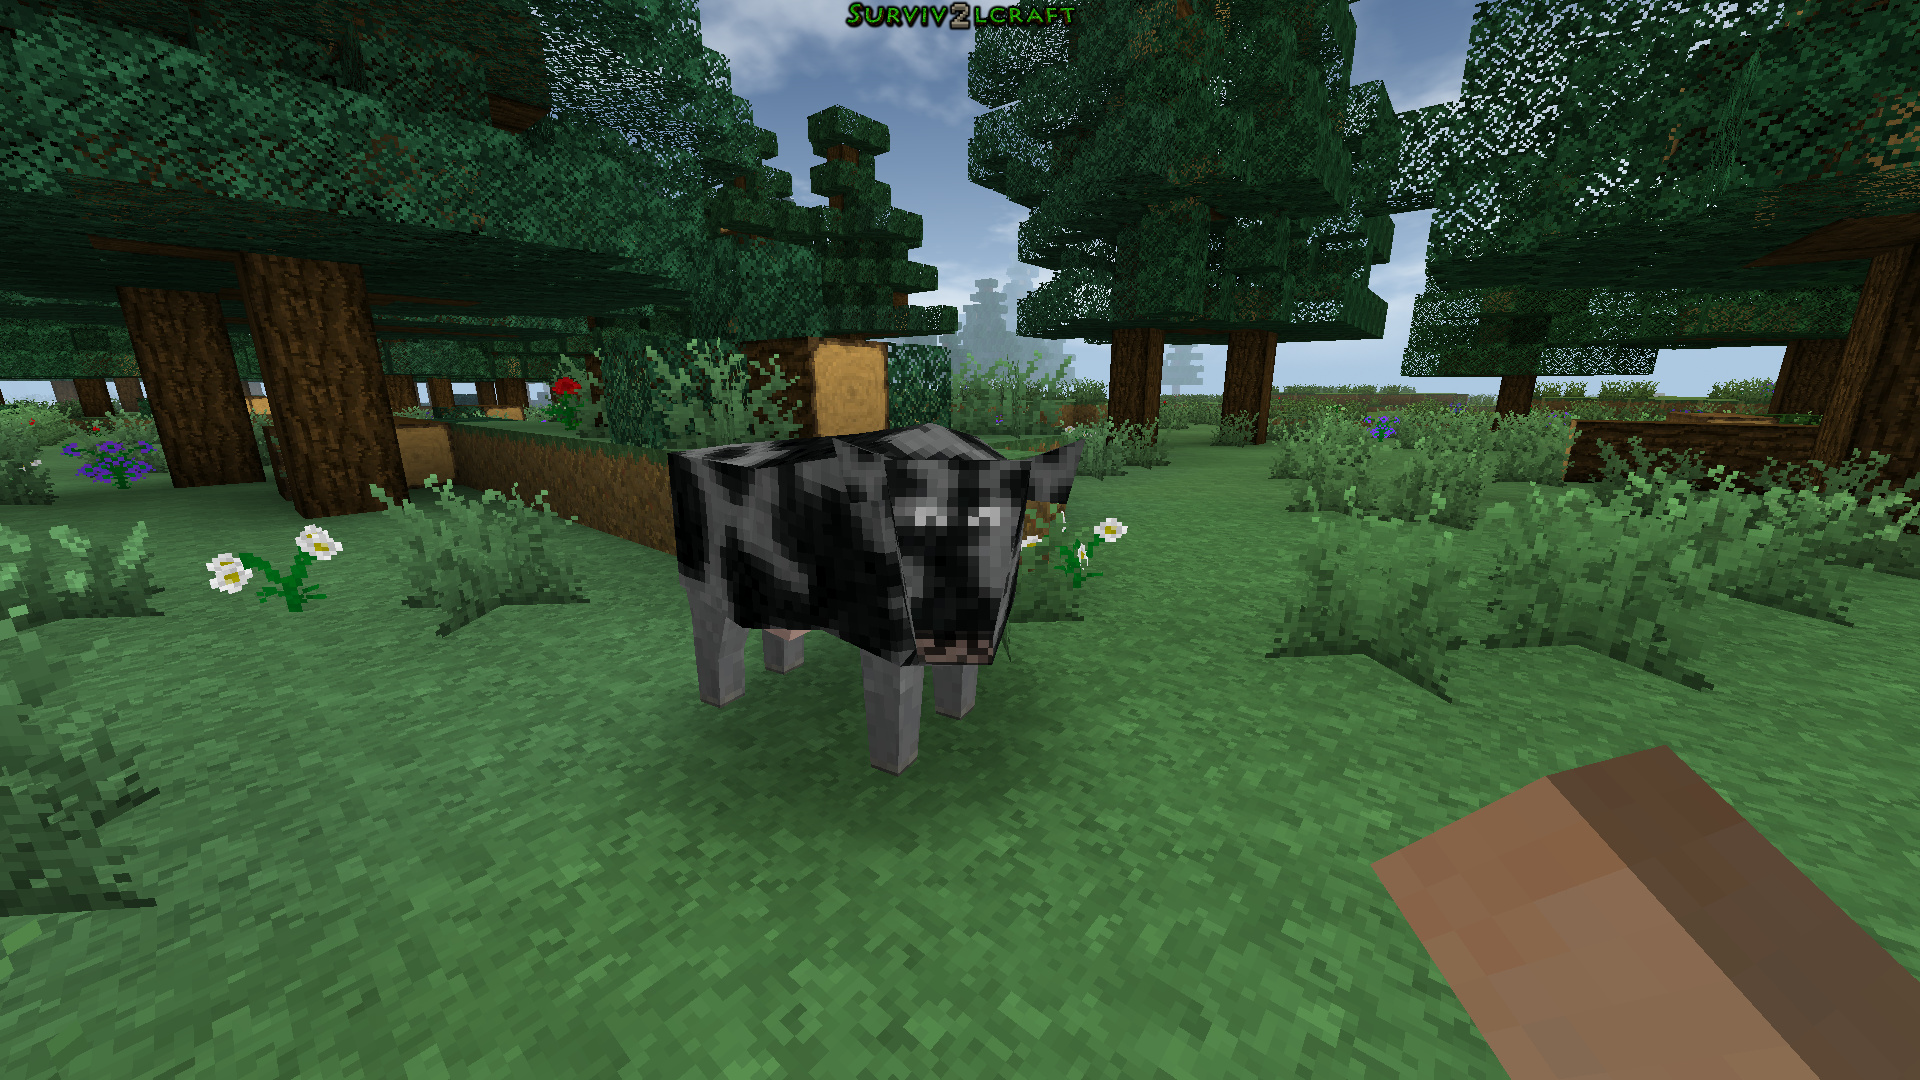 My farm SO FAR in survivalcraft i will post more pics when i finish. We got  my horses my black cows and my brown cows so far.